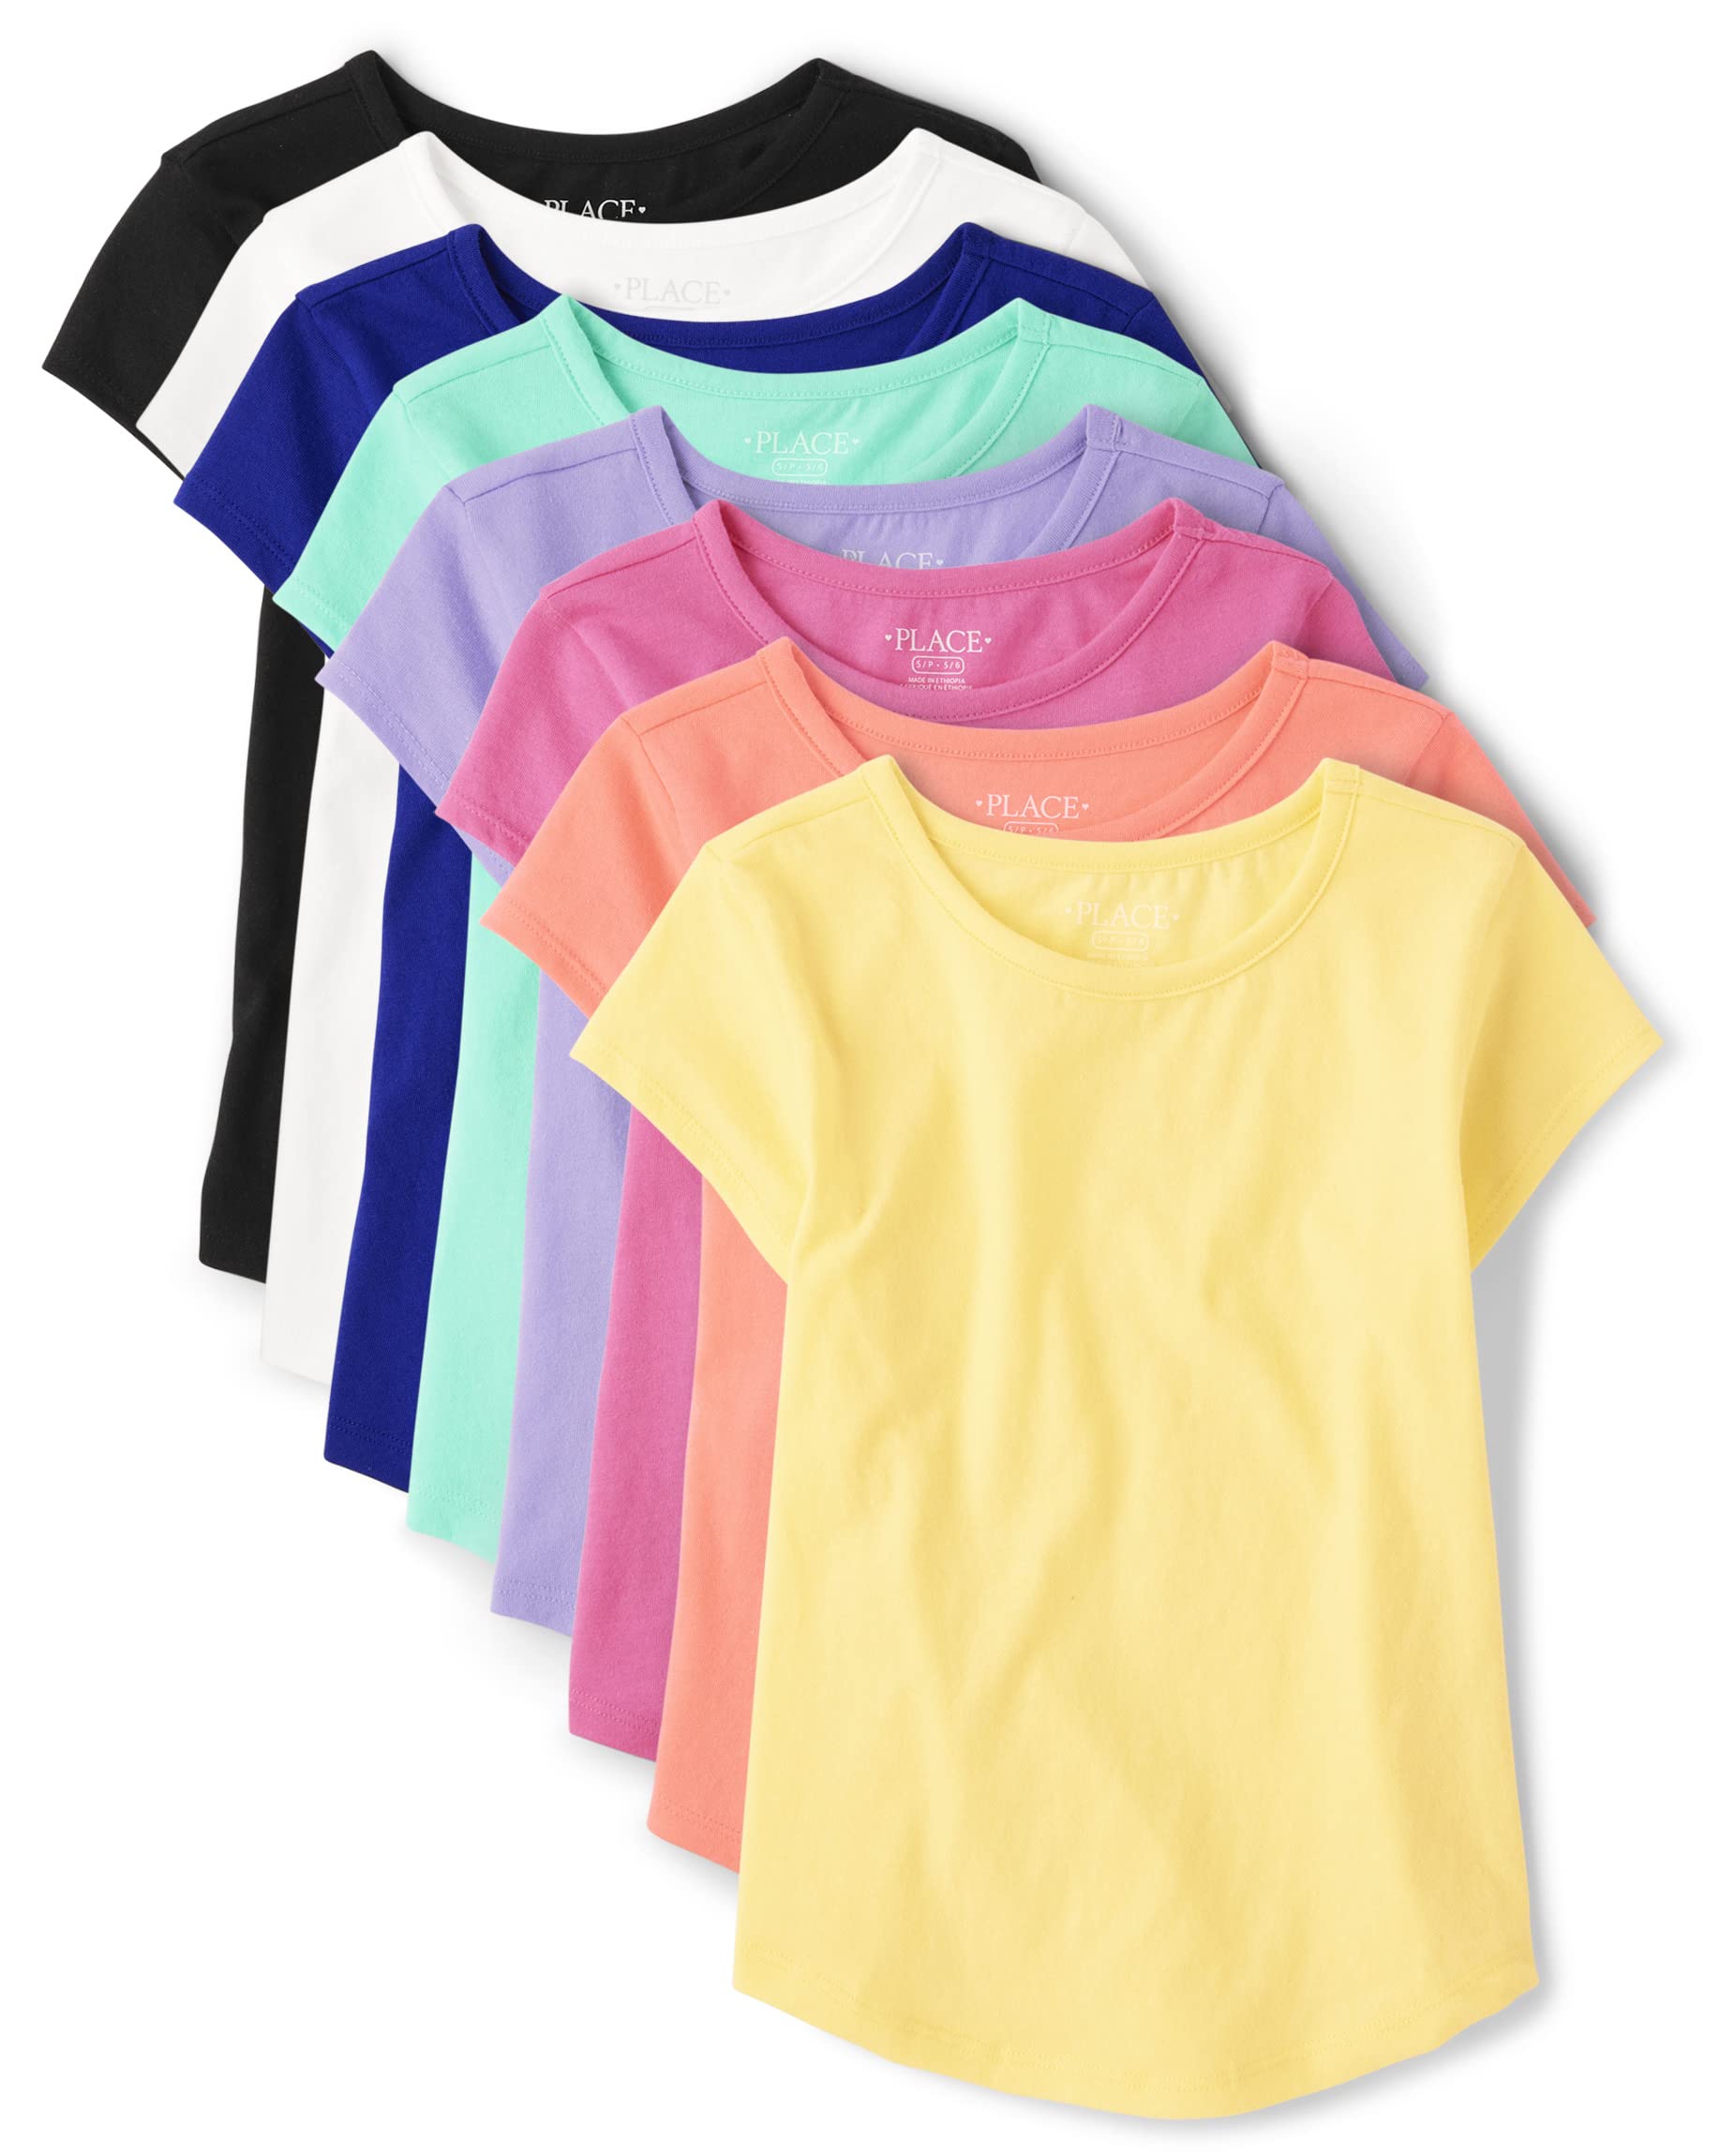 The Children's Place girls Short Sleeve High Low Tee